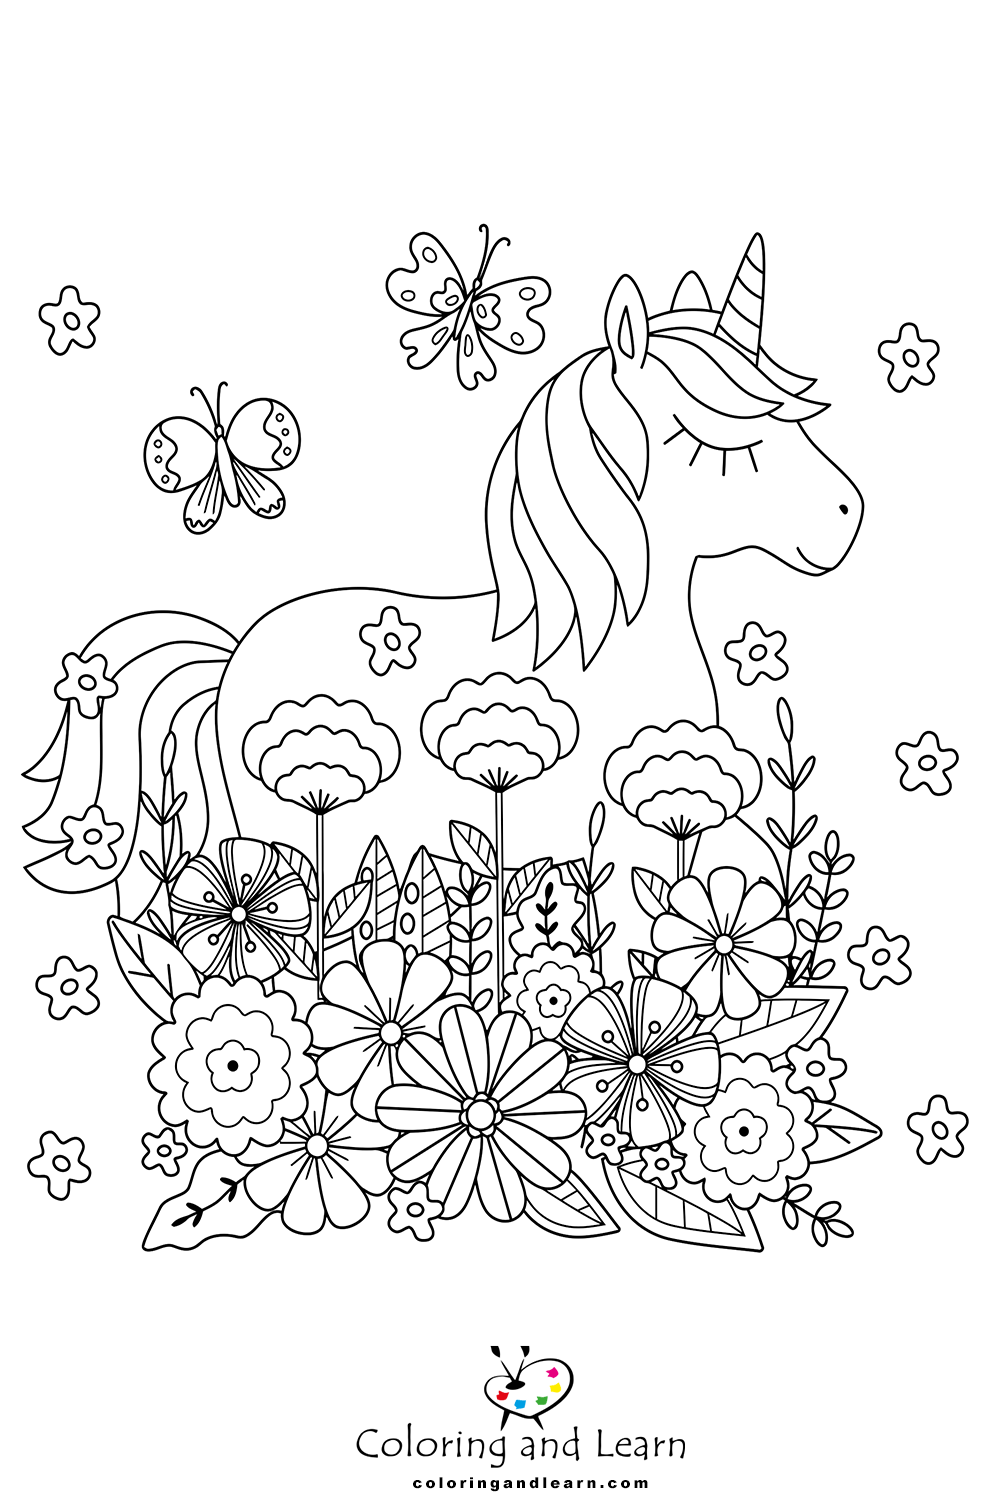 Unicorn Coloring Pages 5 